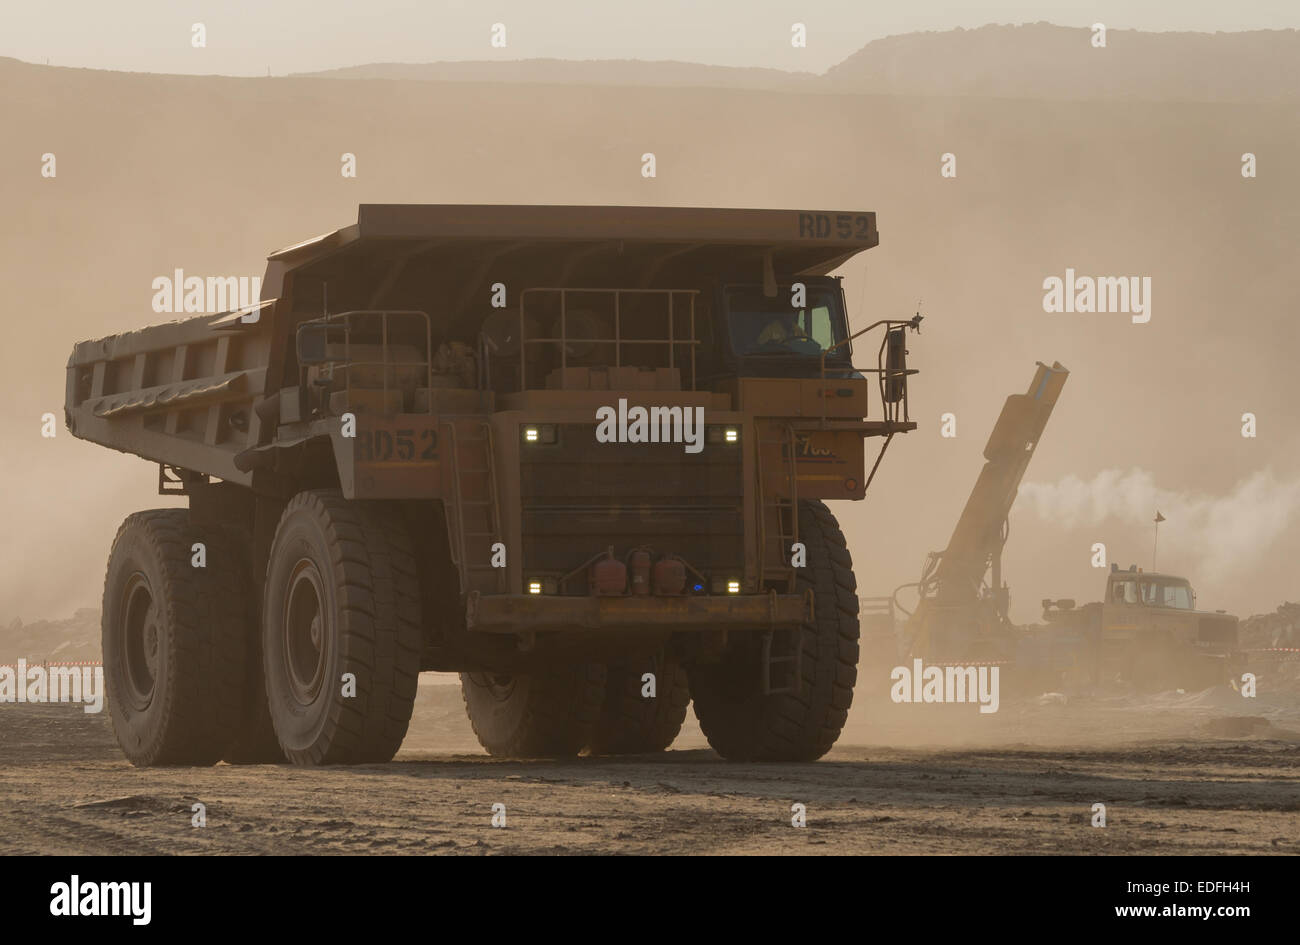 A large Caterpillar mining truck drives across a dusty open cast mine with a drill rig in the background. Stock Photo